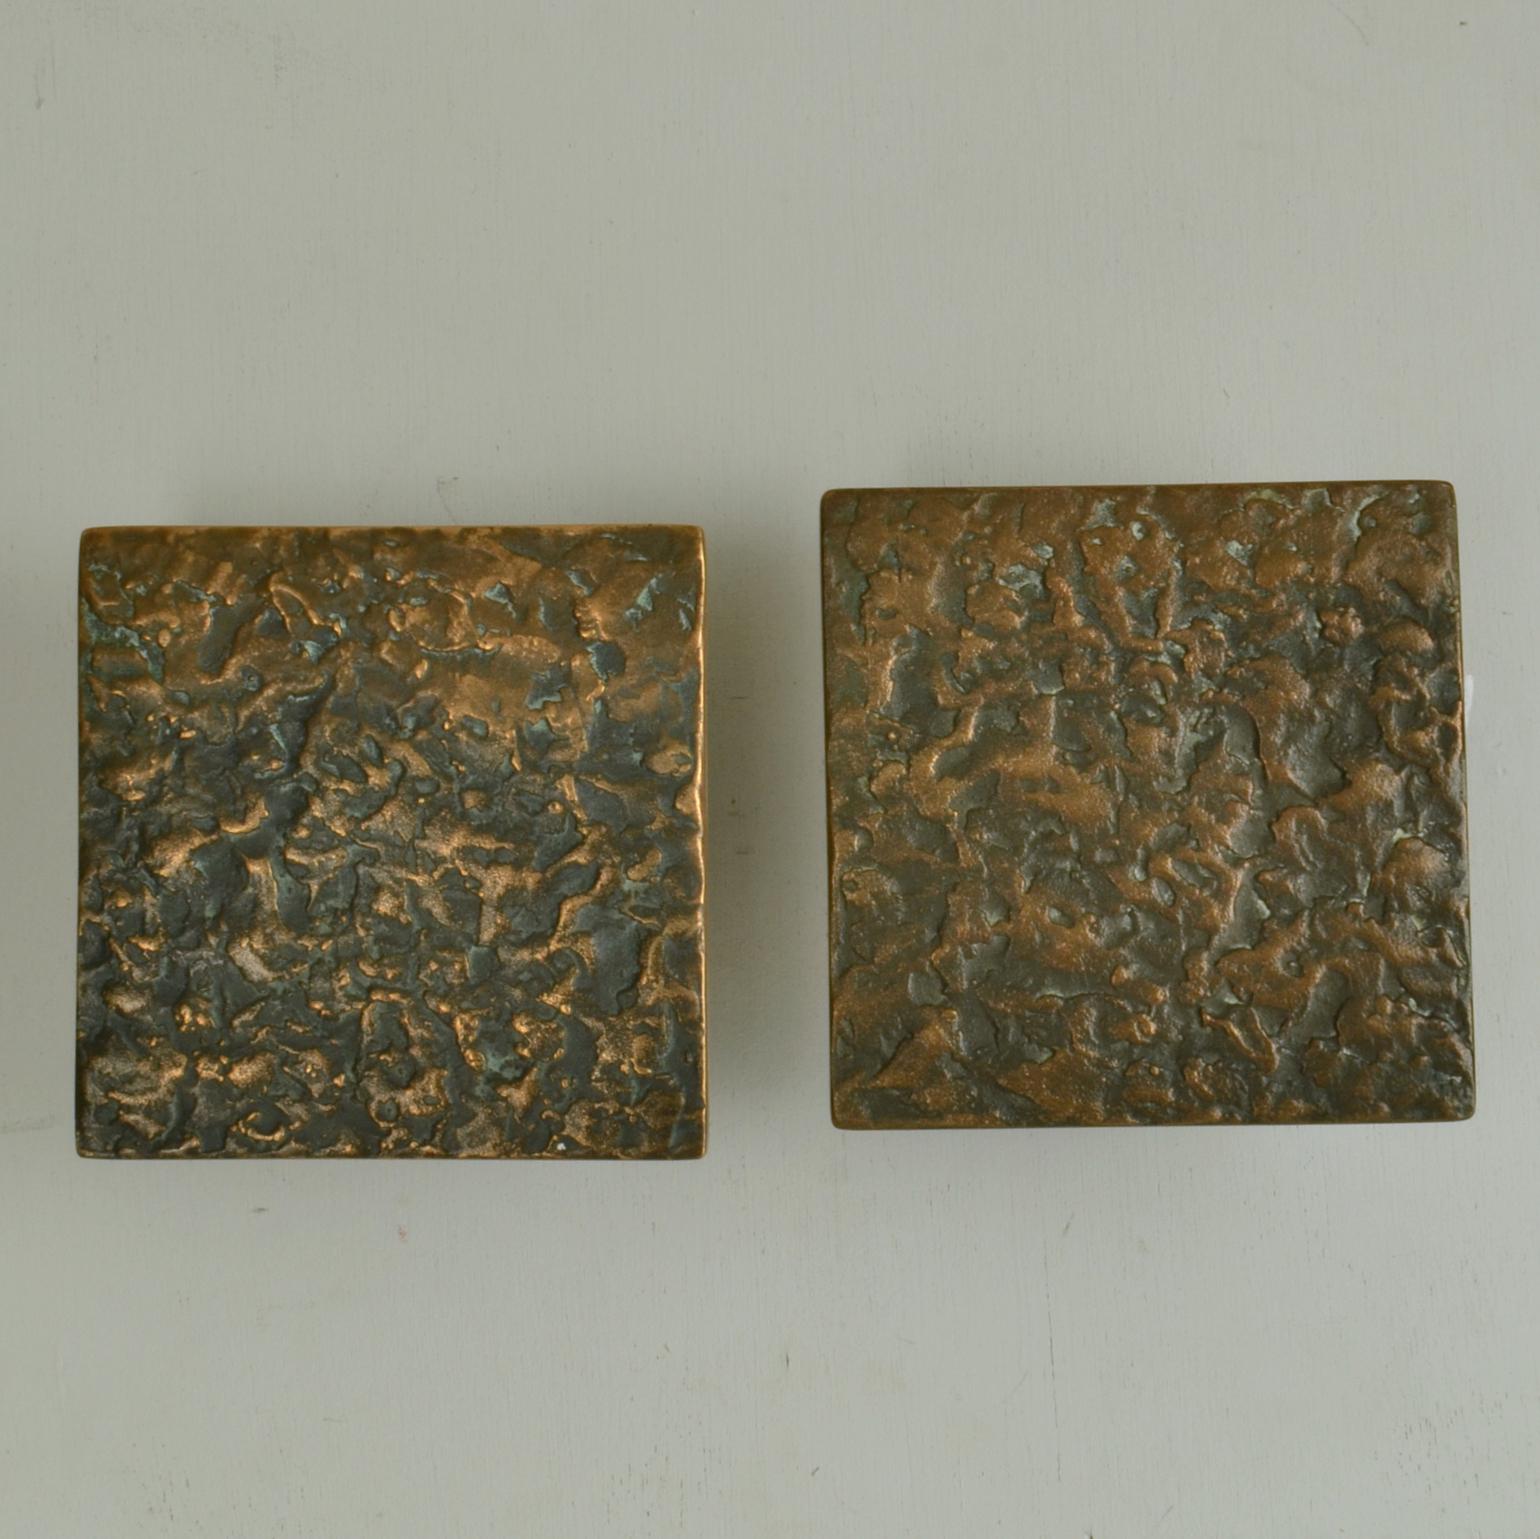 Set of two square Brutalist bronze door handles with relief a subtle relief and texture with original patina, European 1970's. 
These identical handles can be applied inside or outside on a pair of double doors next to each other or on a single door